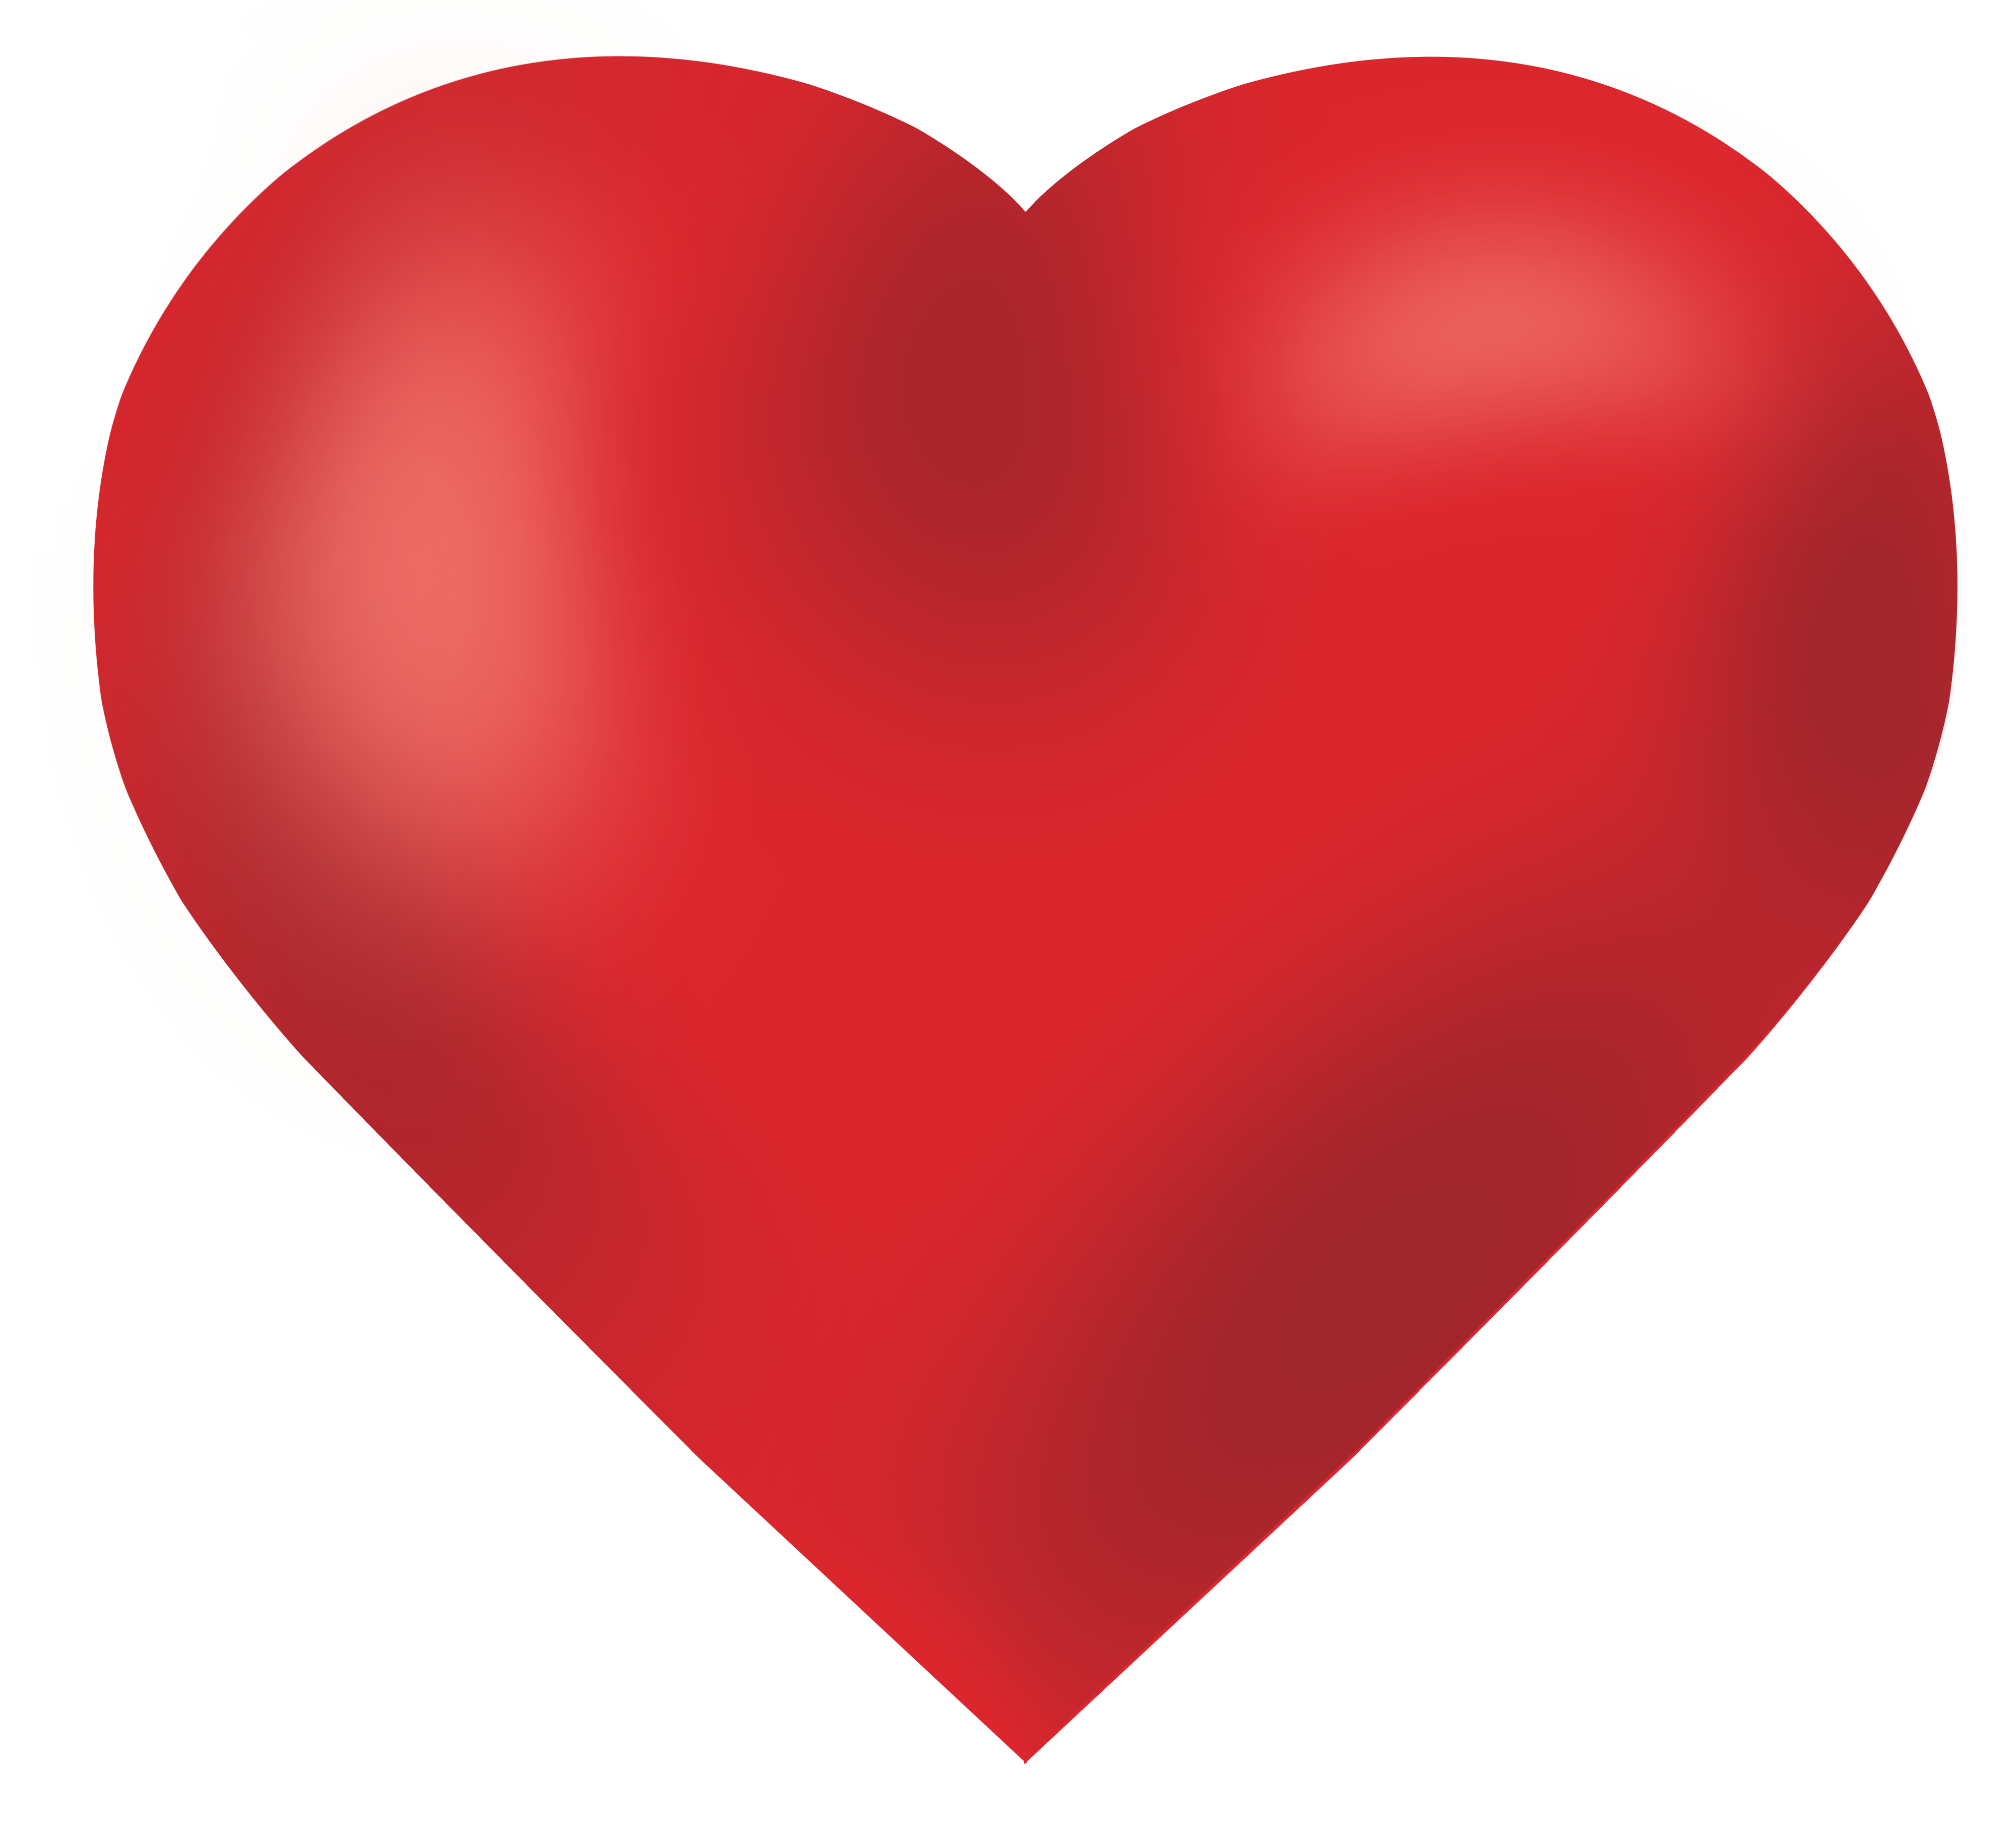 Heart Png Heart Transparent Background Freeiconspng